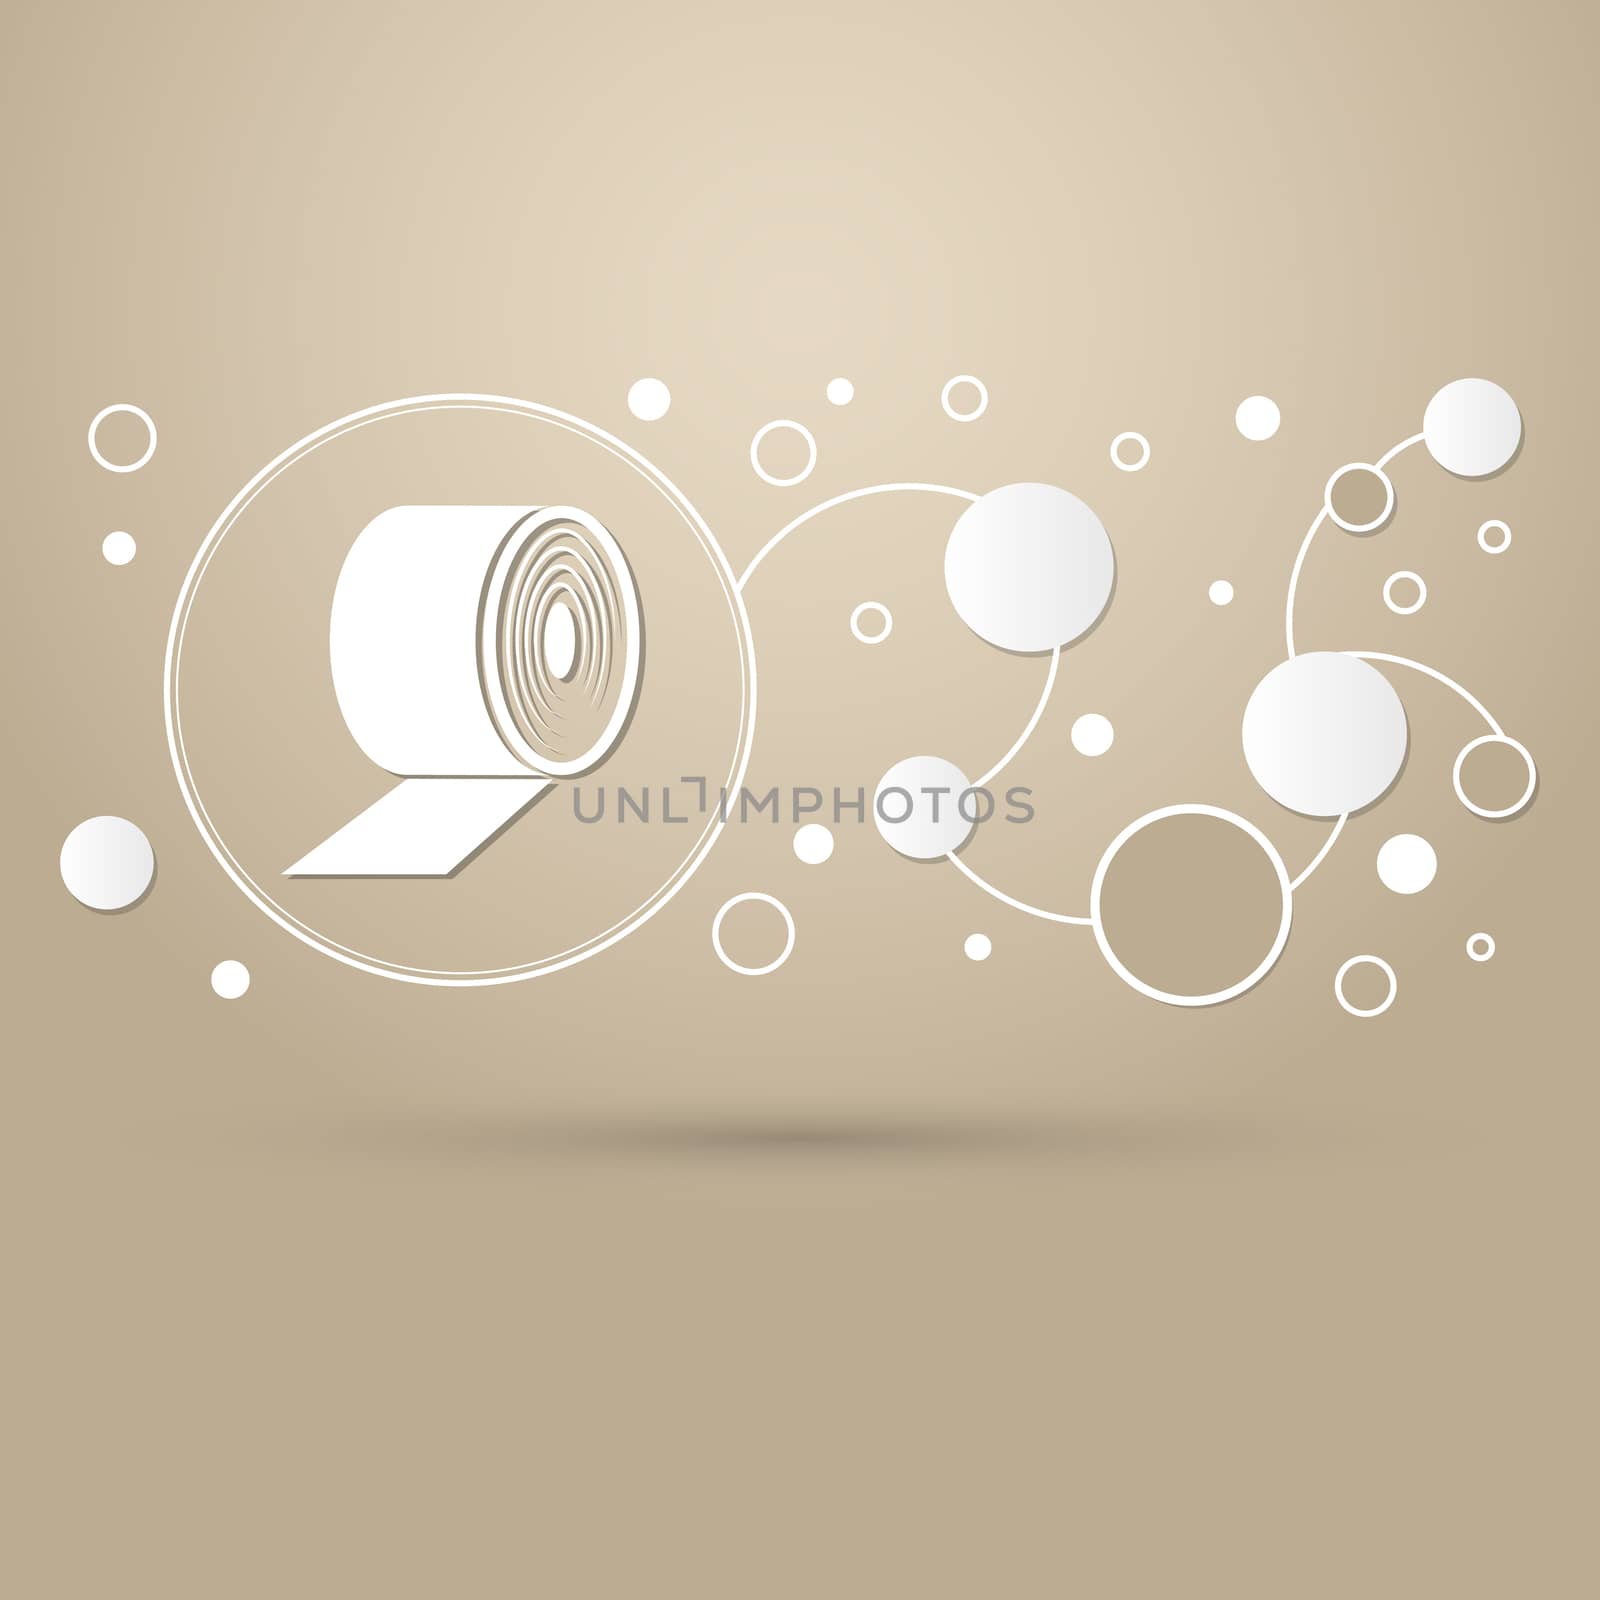 Toilet paper icon on a brown background with elegant style and modern design infographic. illustration